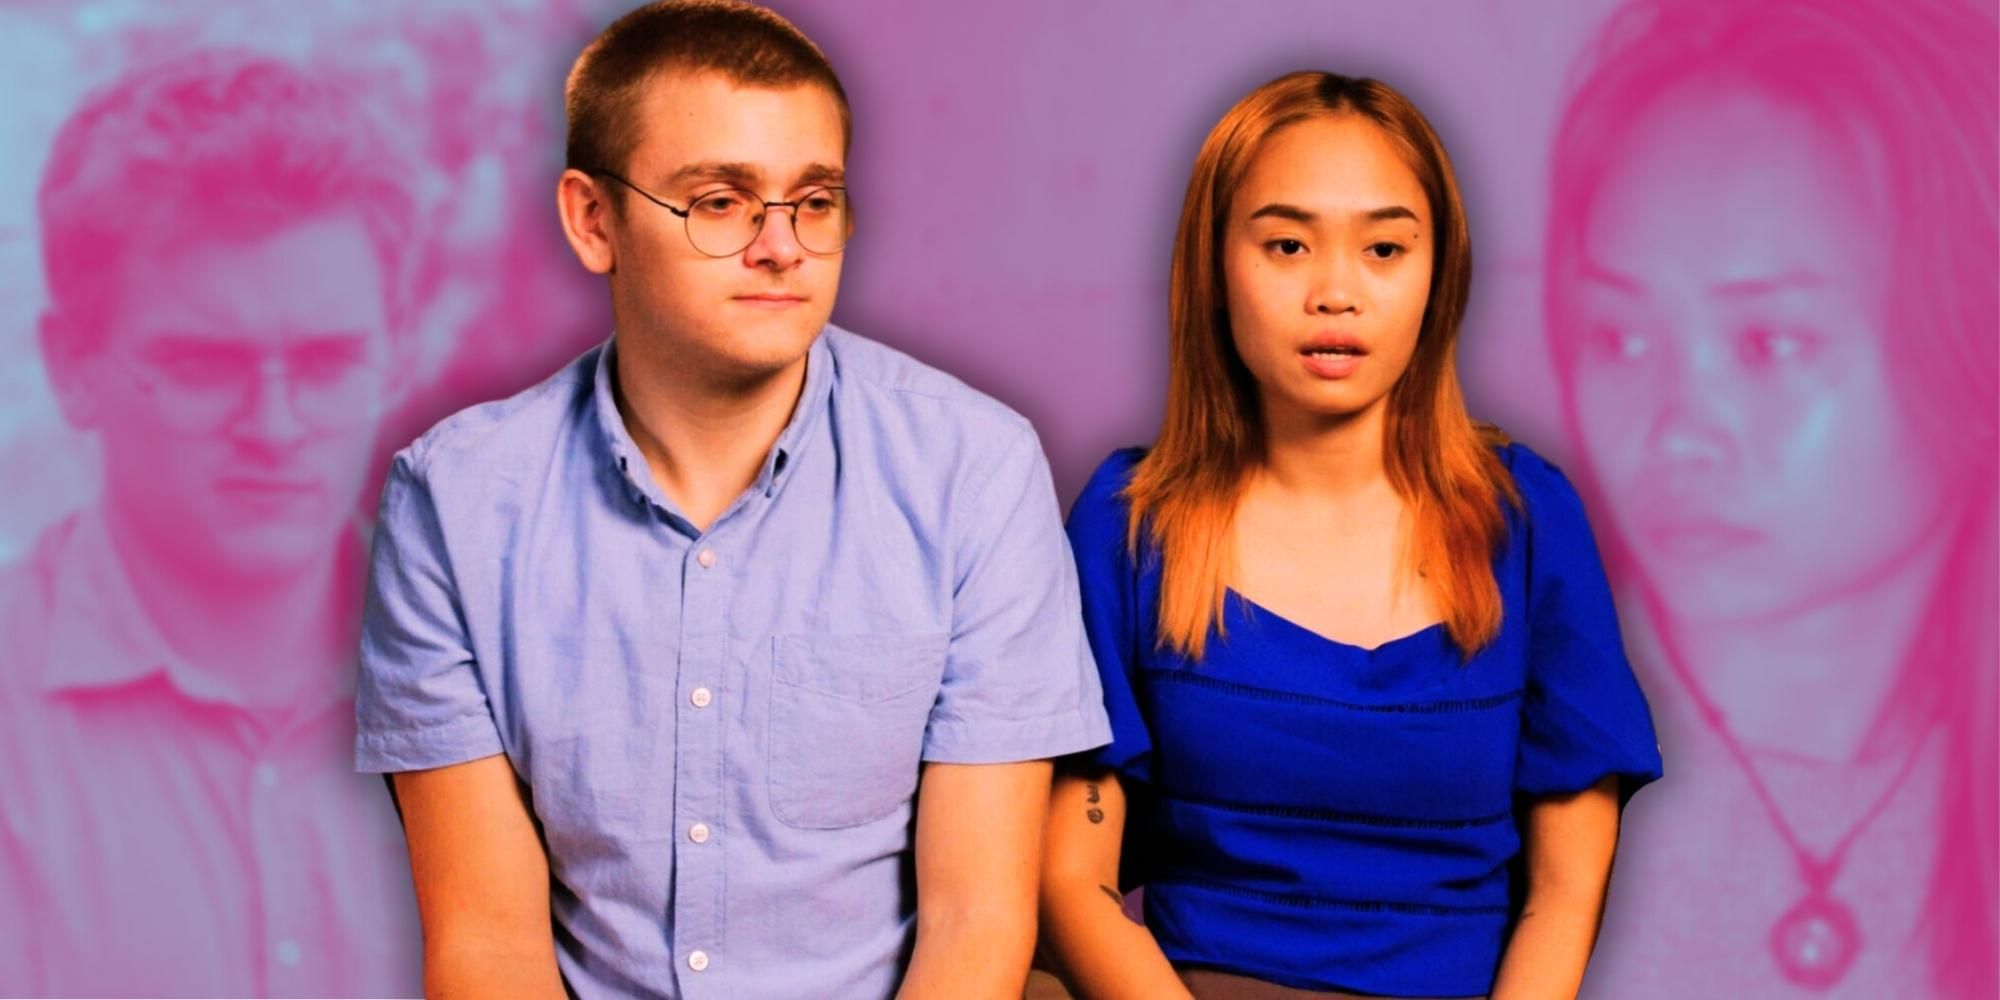 Brandan and Mary from 90 day fiance sitting together and talking in front of pink background